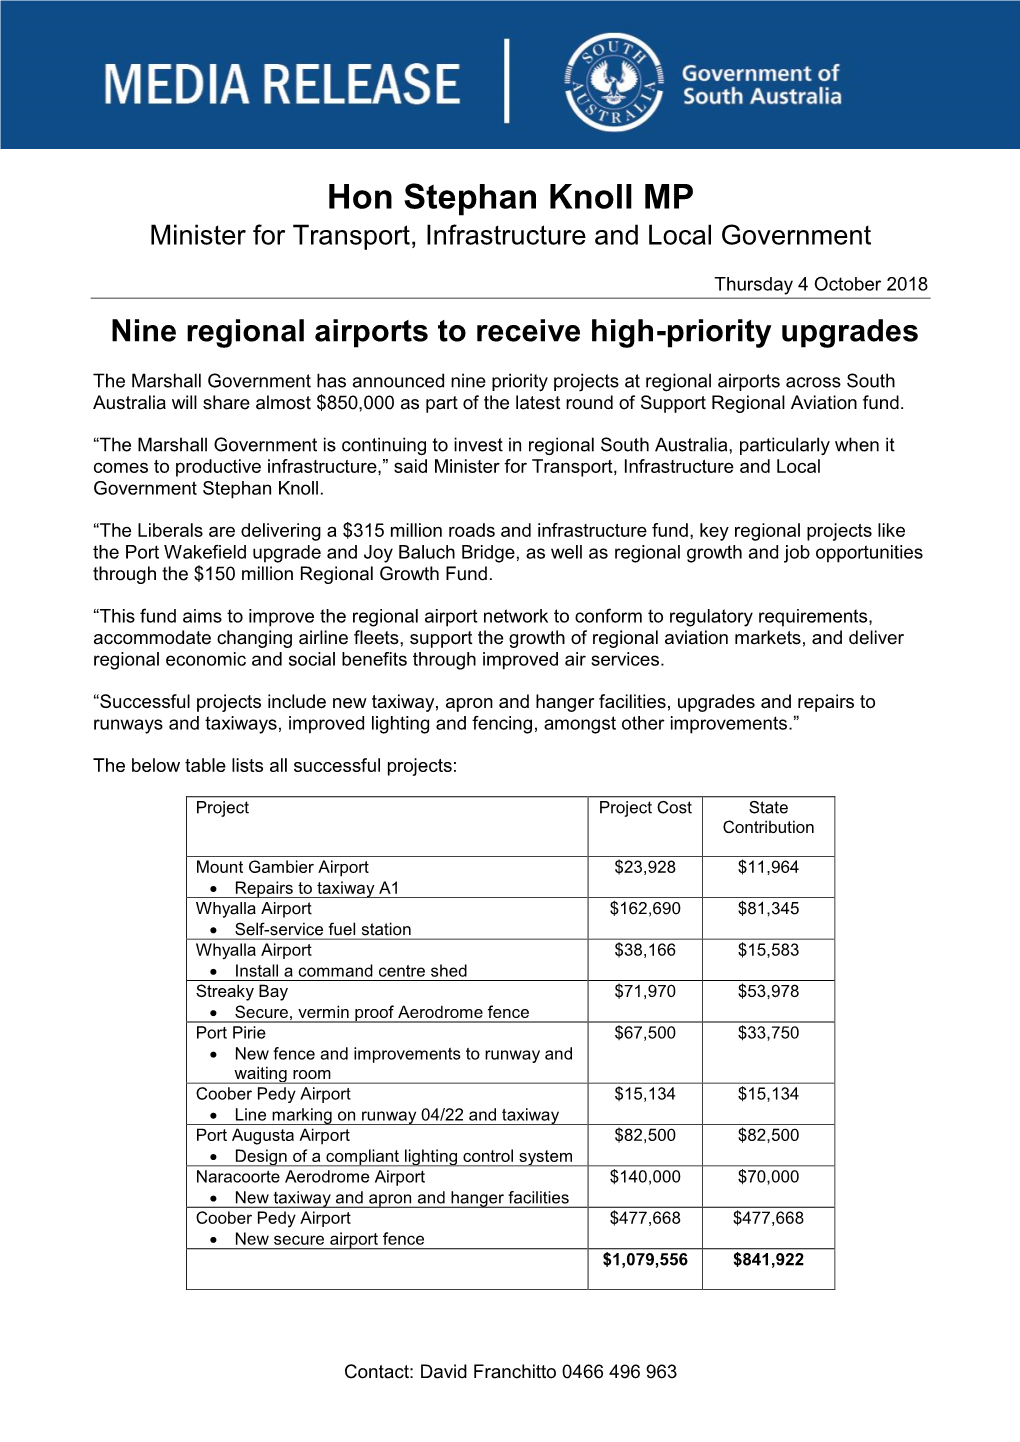 Nine Regional Airports to Receive High-Priority Upgrades